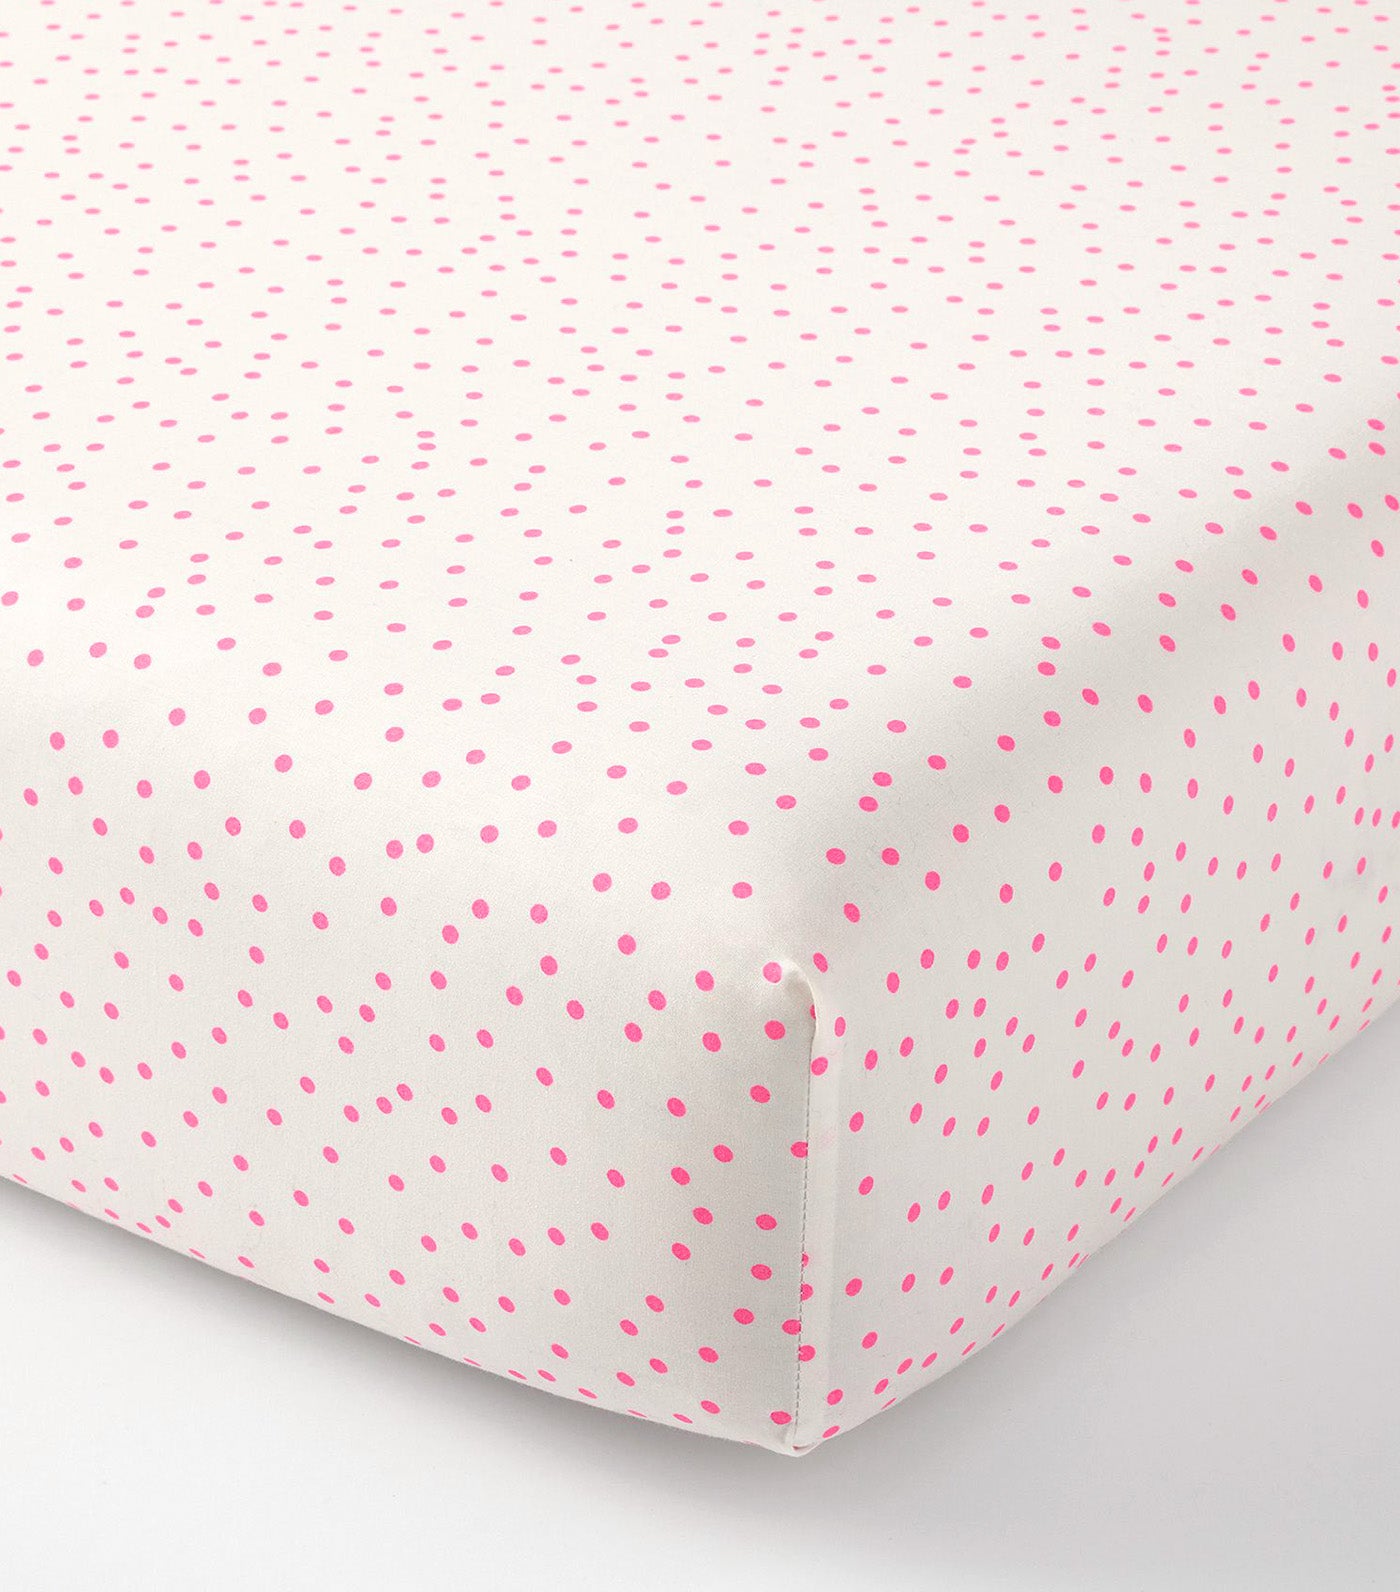 Monique Lhuillier Neon Dots Organic Crib Fitted Sheet